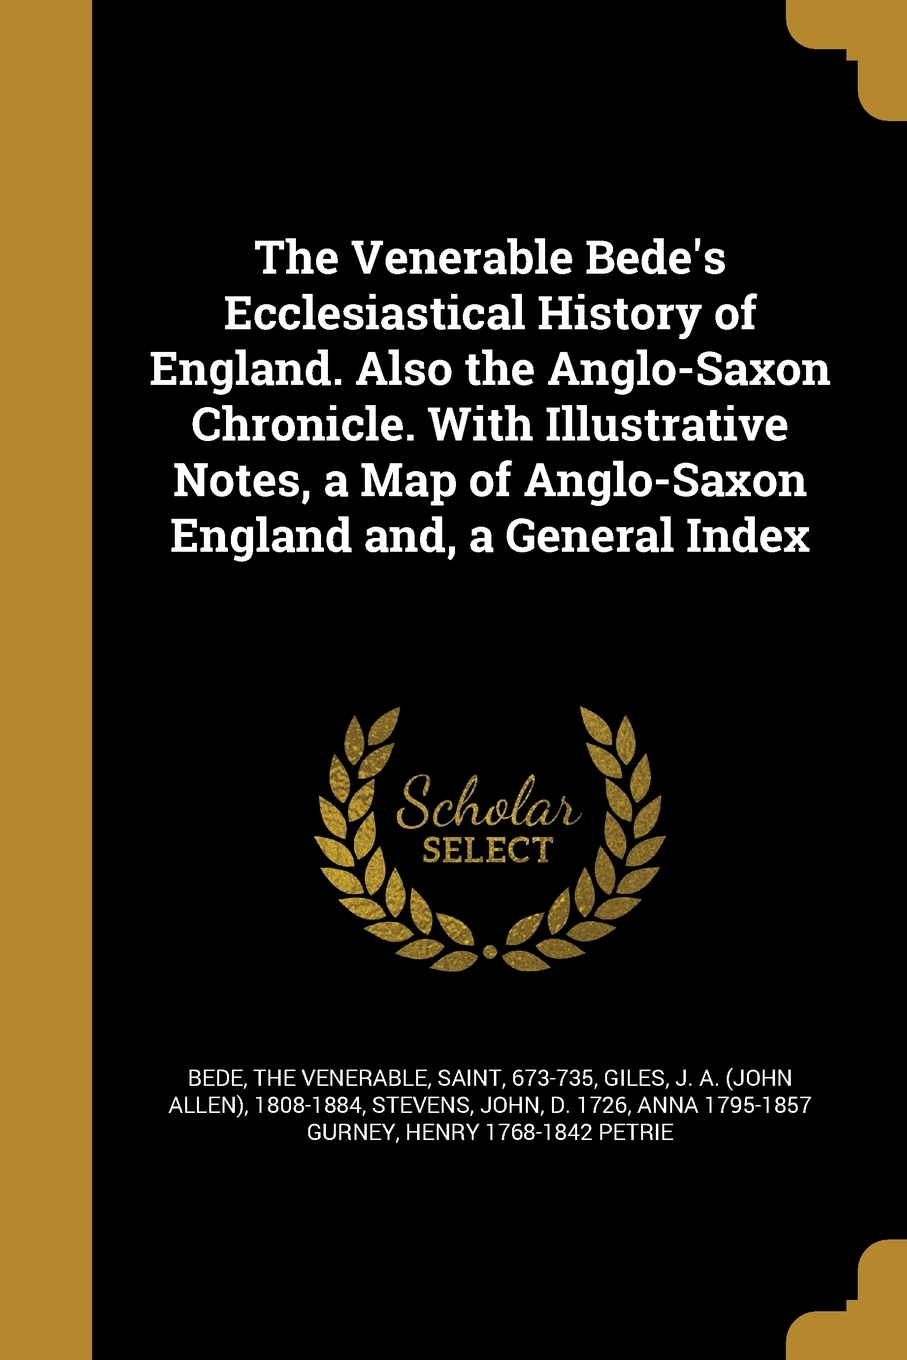 The Venerable Bede's Ecclesiastical History of England: Also the Anglo-Saxon Chronicle. With Illustrative Notes, a Map of Anglo-Saxon England and a General Index